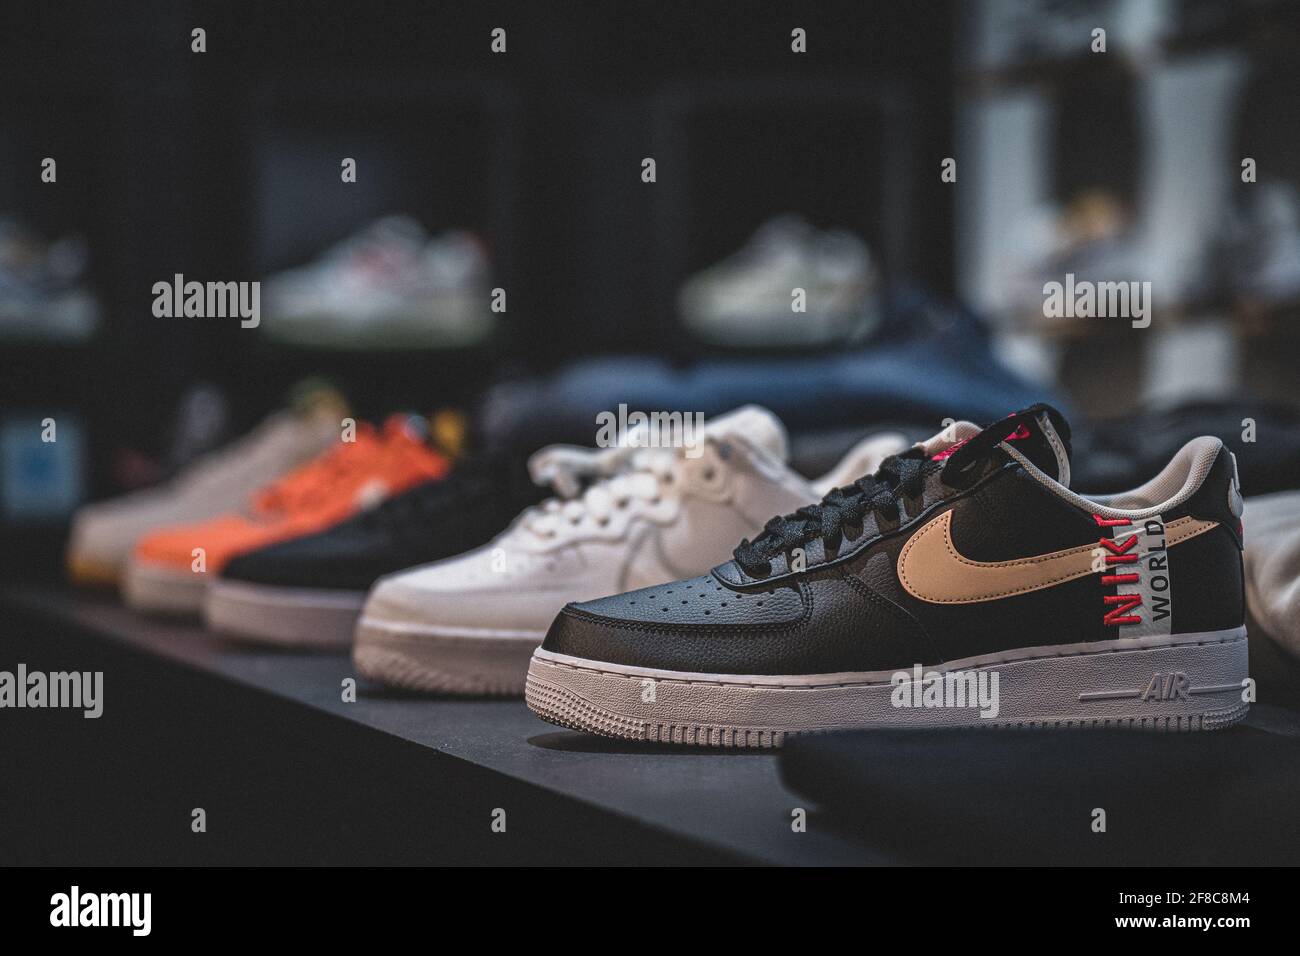 VANCOUVER, CANADA - Apr 12, 2021: Nike air force 1s placed on a diagonal  line in store display Stock Photo - Alamy